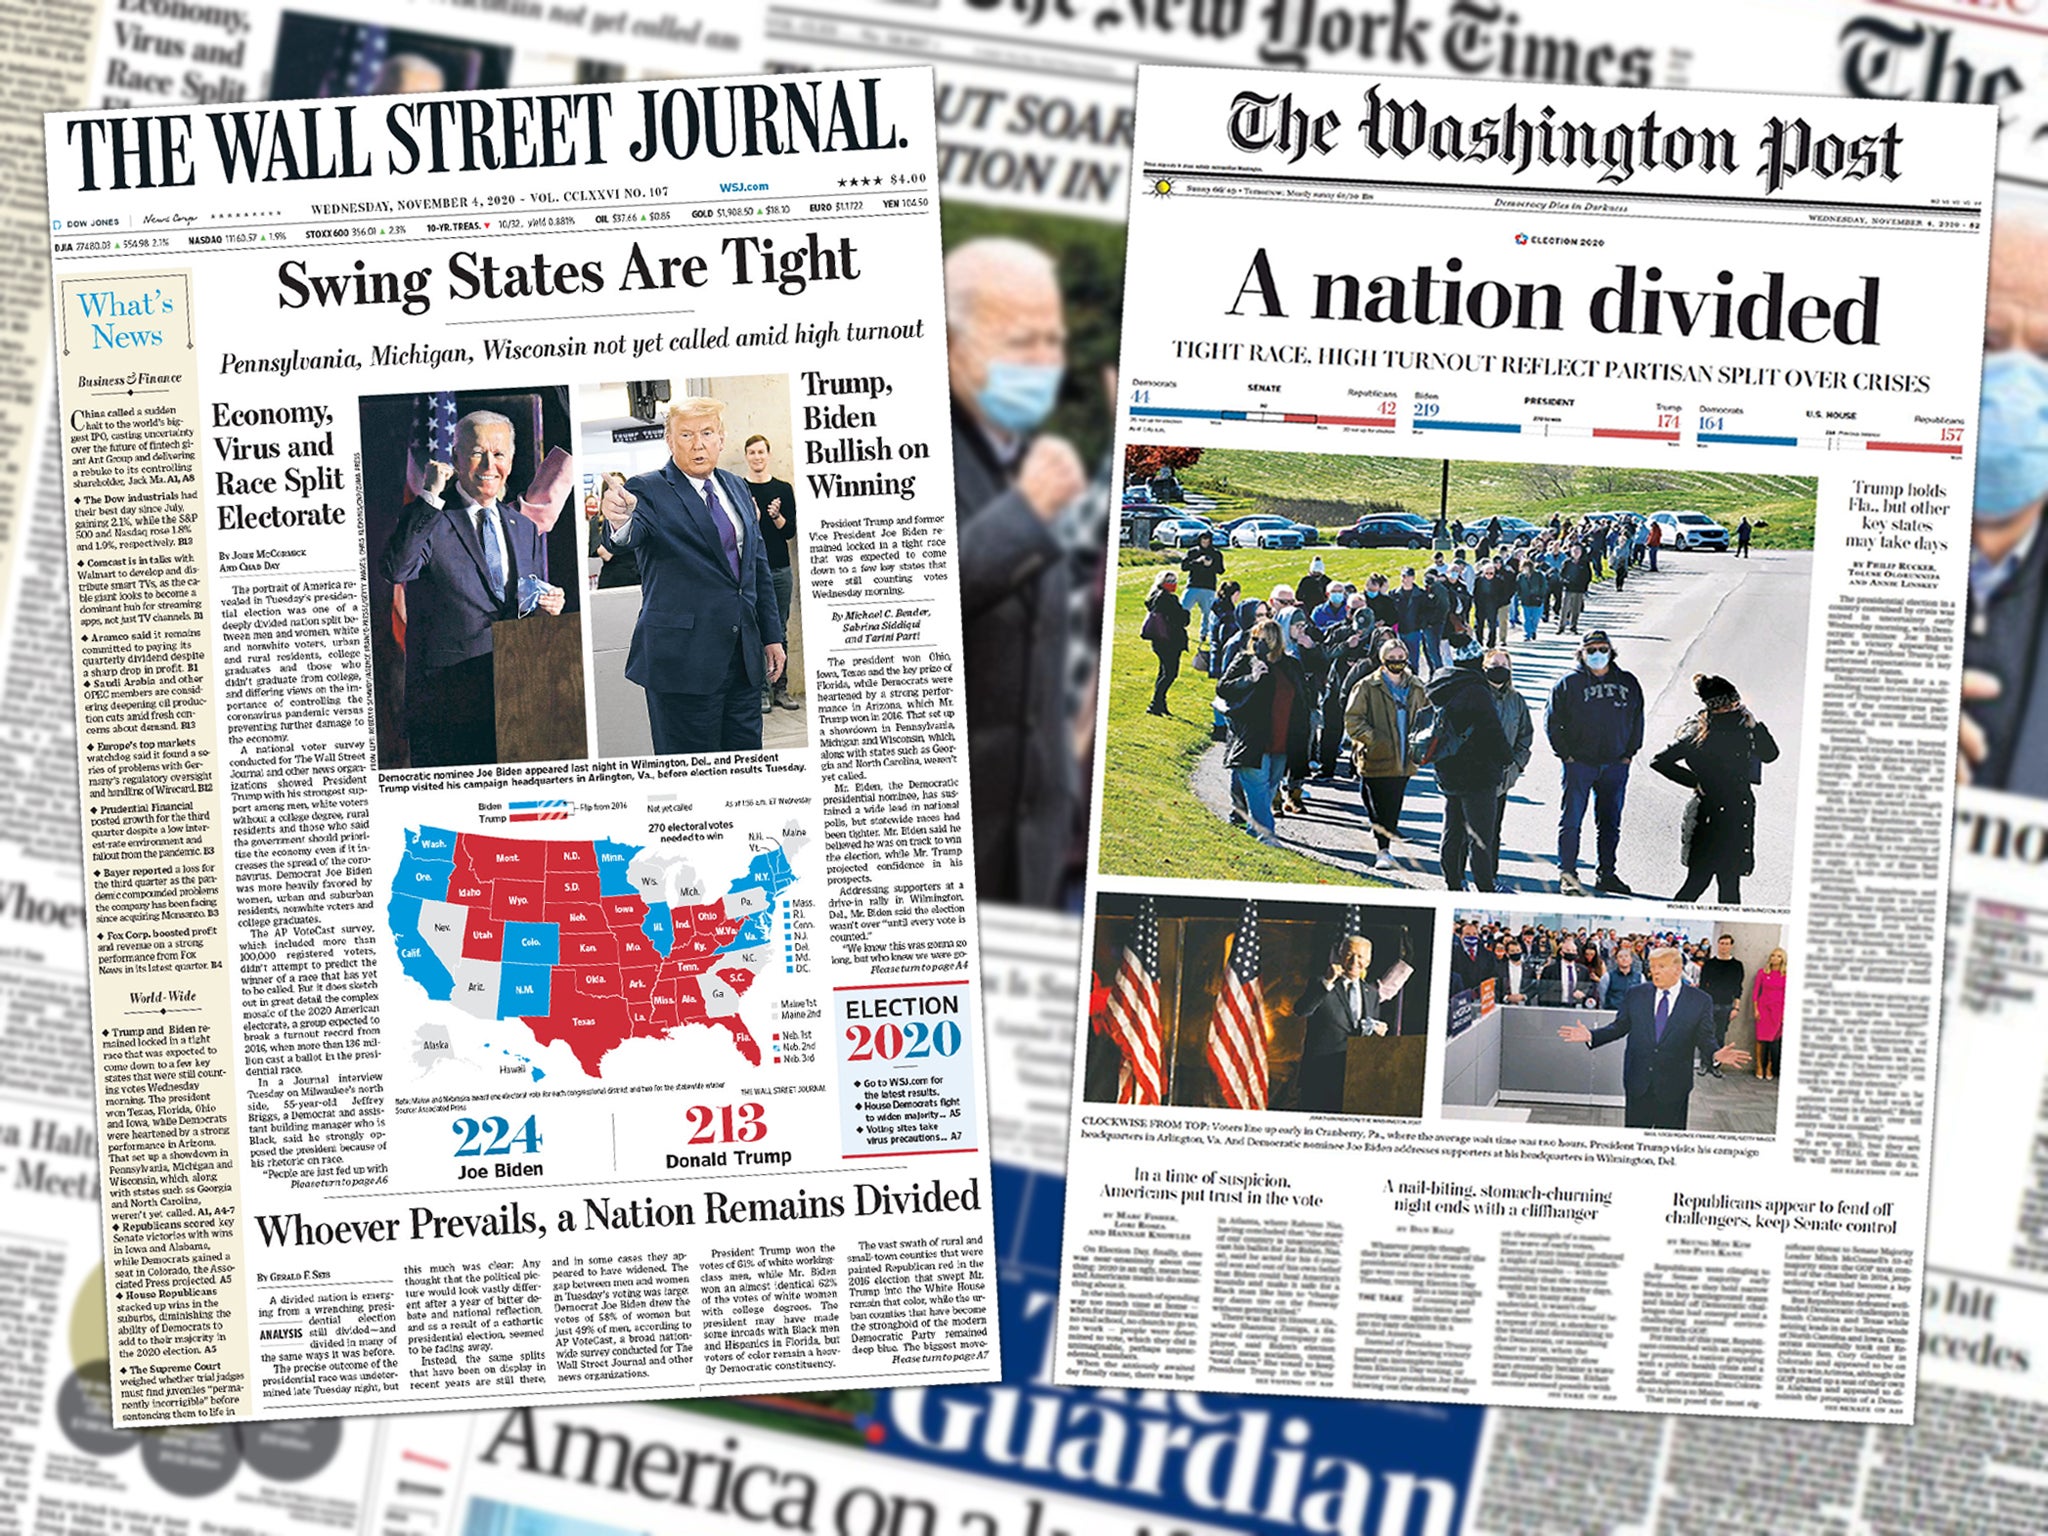 The race was tight as papers hit shelves on Wednesday morning